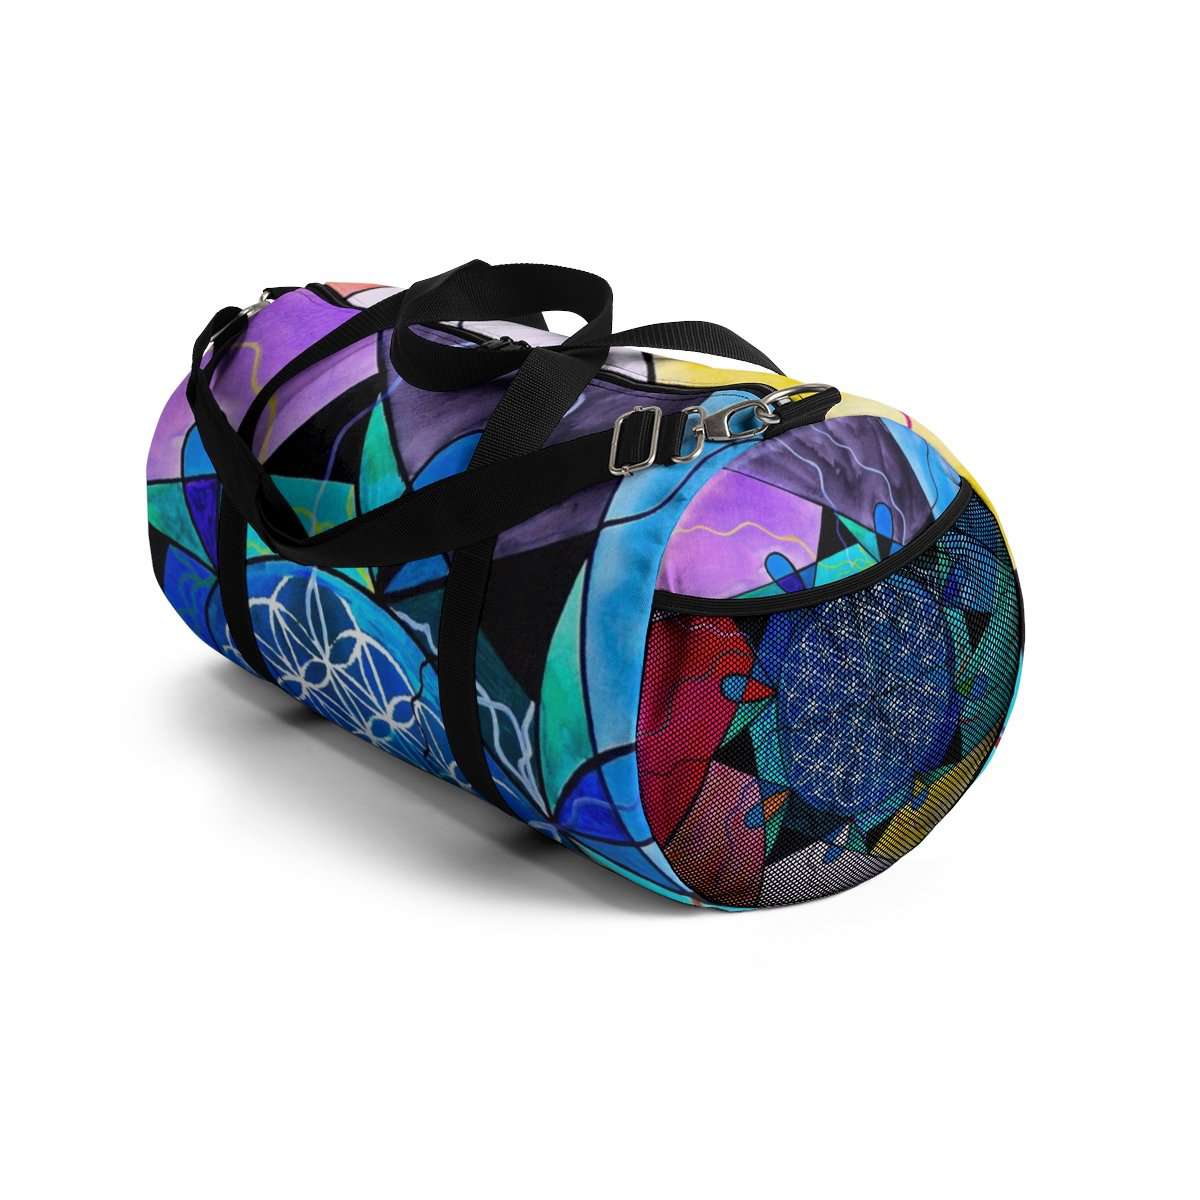 the-official-source-for-the-flower-of-life-duffle-bag-online_8.jpg